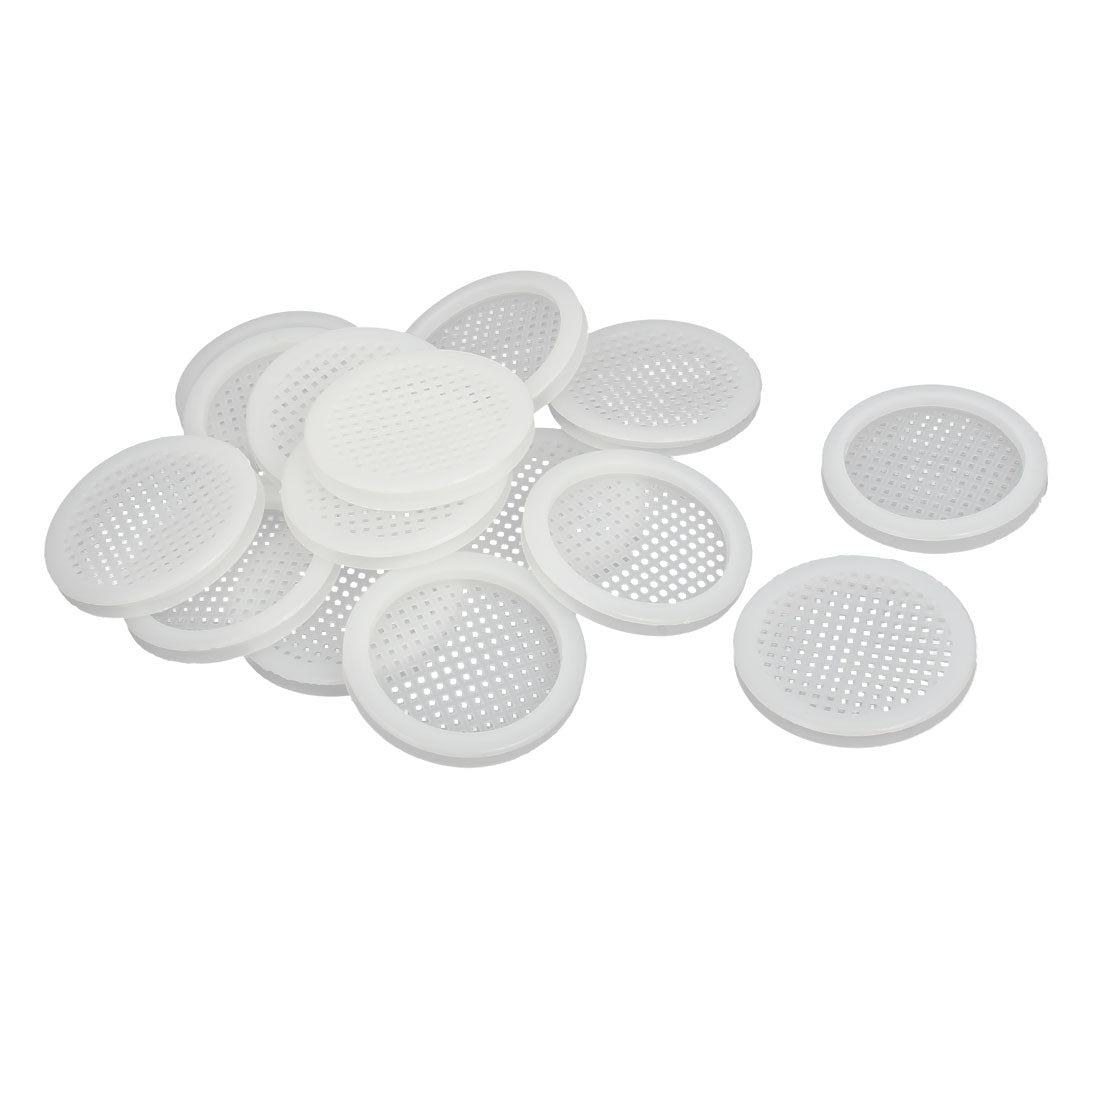 uxcell Uxcell Furniture Cupboard Plastic Round Perforated Mesh Air Vents Louver Ventilation 5mm 15pcs